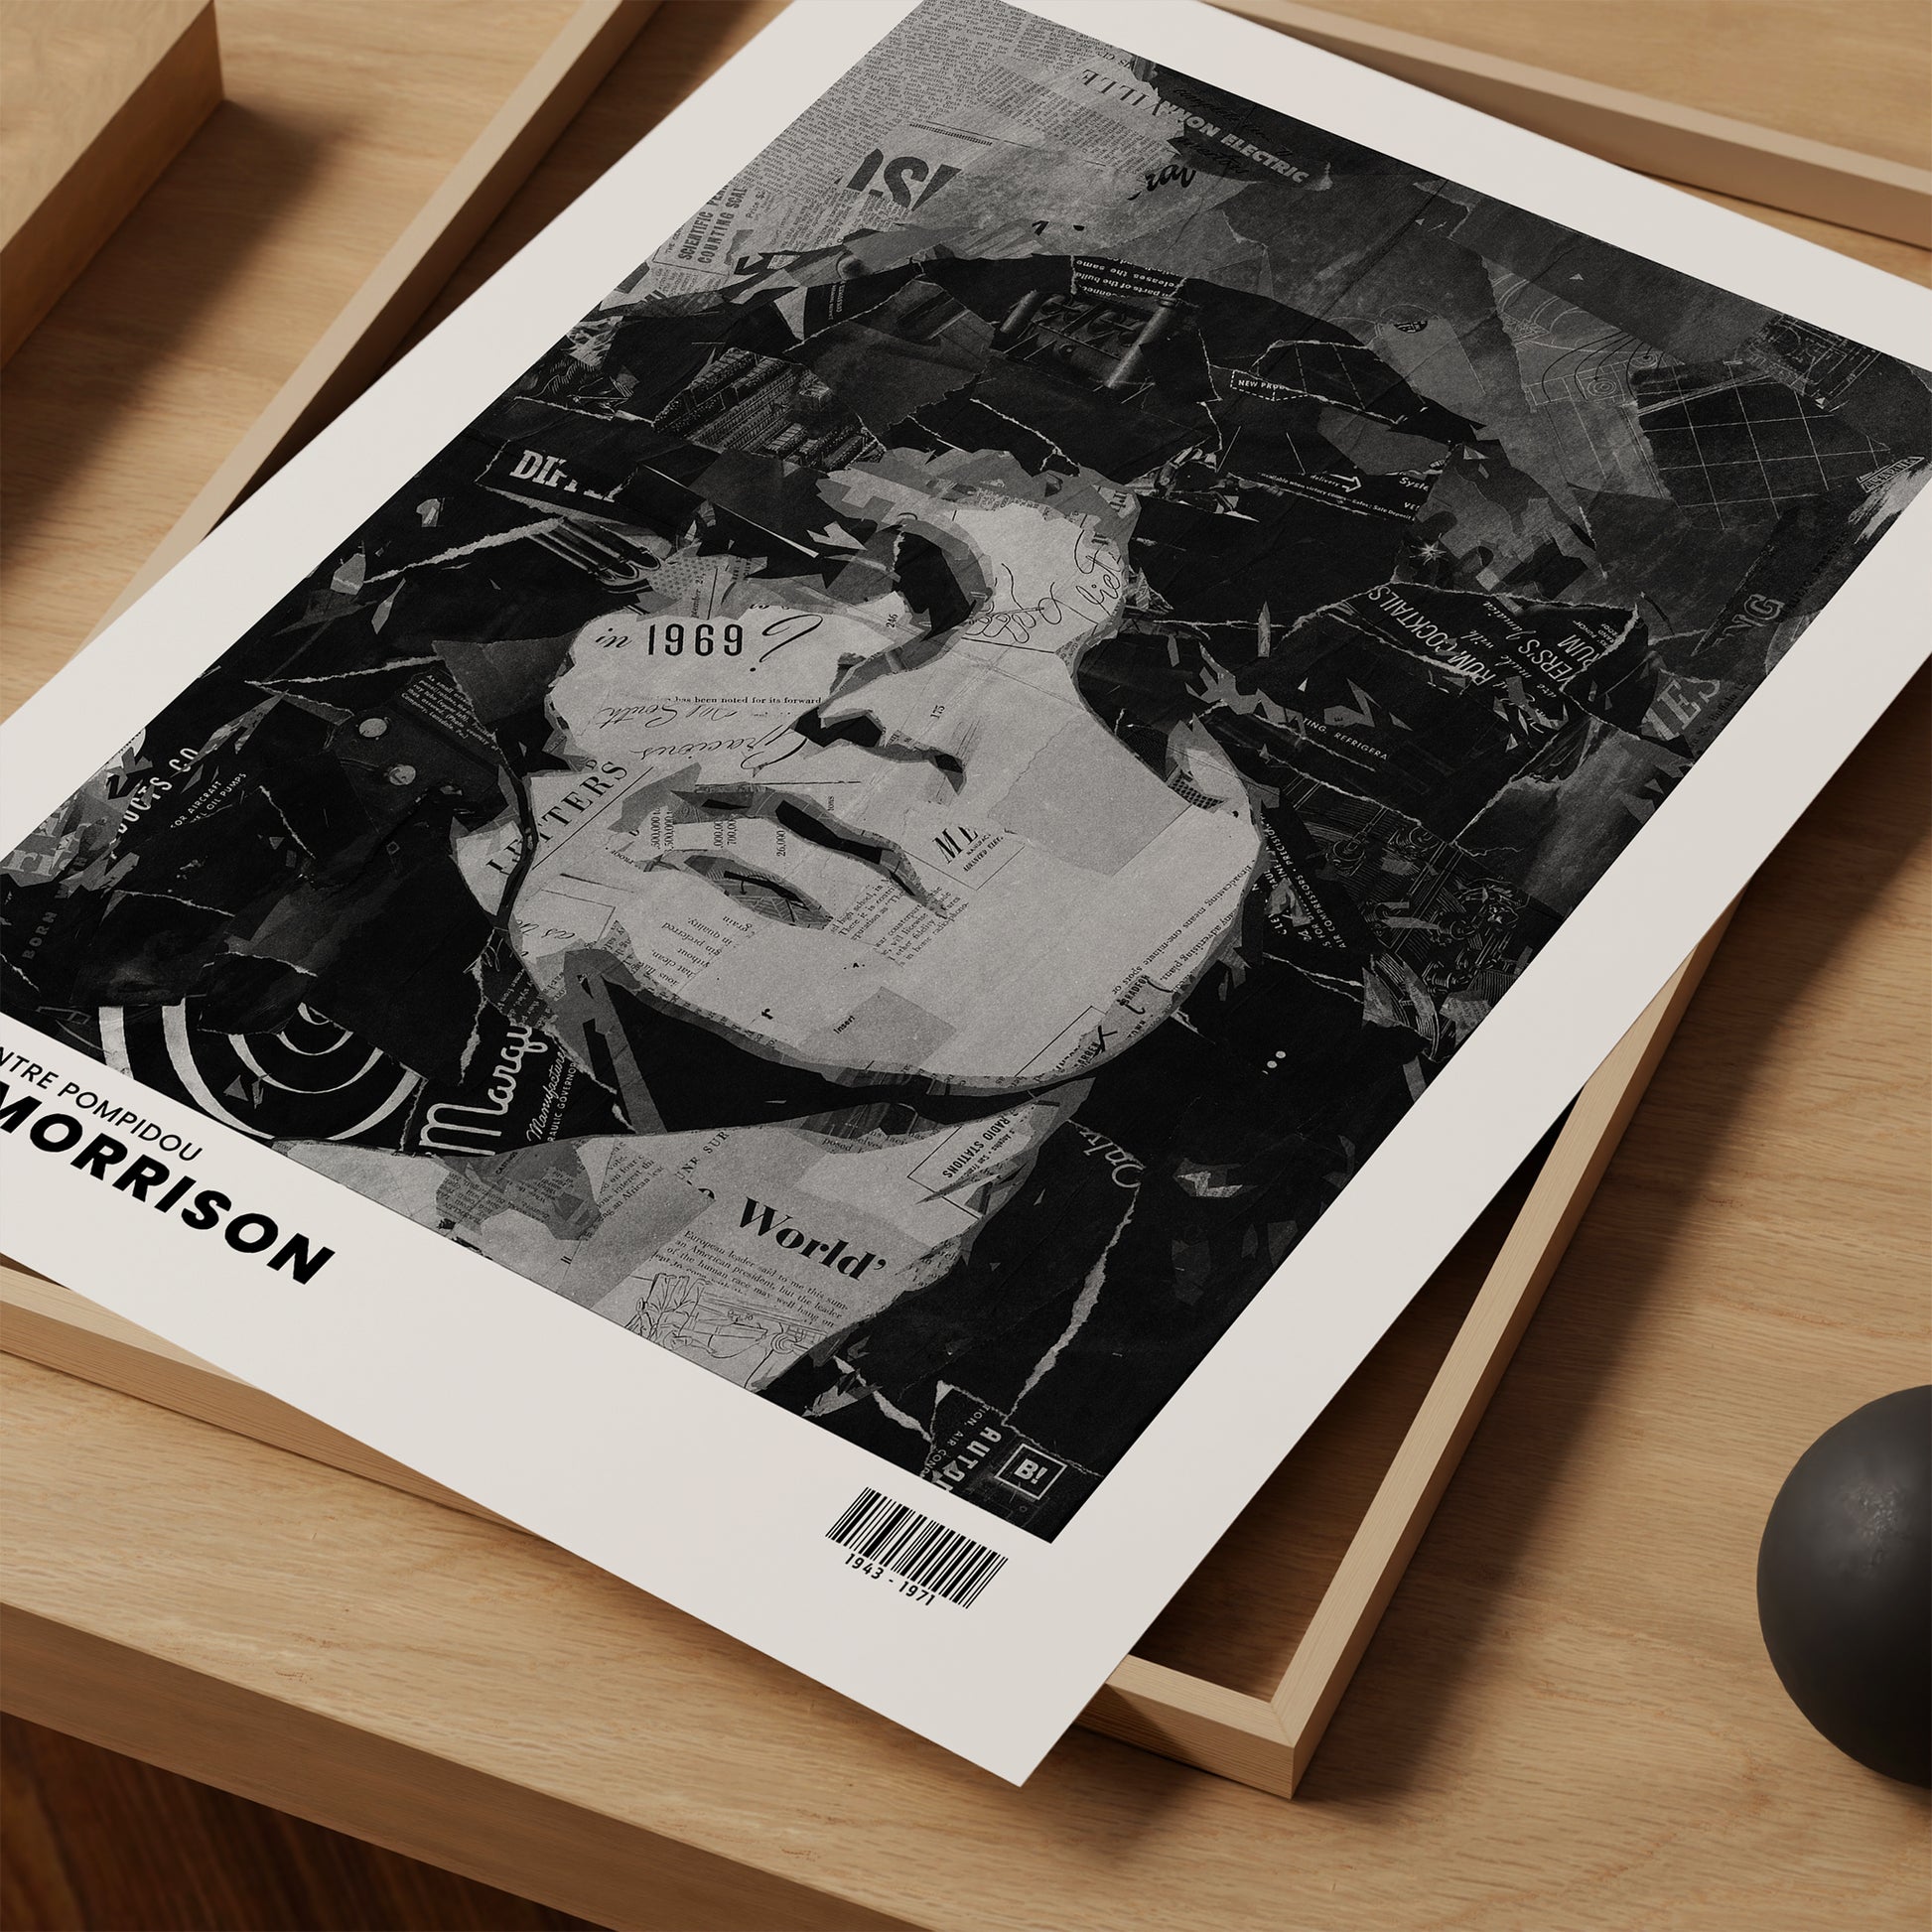 Be inspired by Iconic Jim Morrison Paris Centre Pompidou Exhibition Art Print. The artwork is presented as a print close up that captures its timeless beauty in every detail.